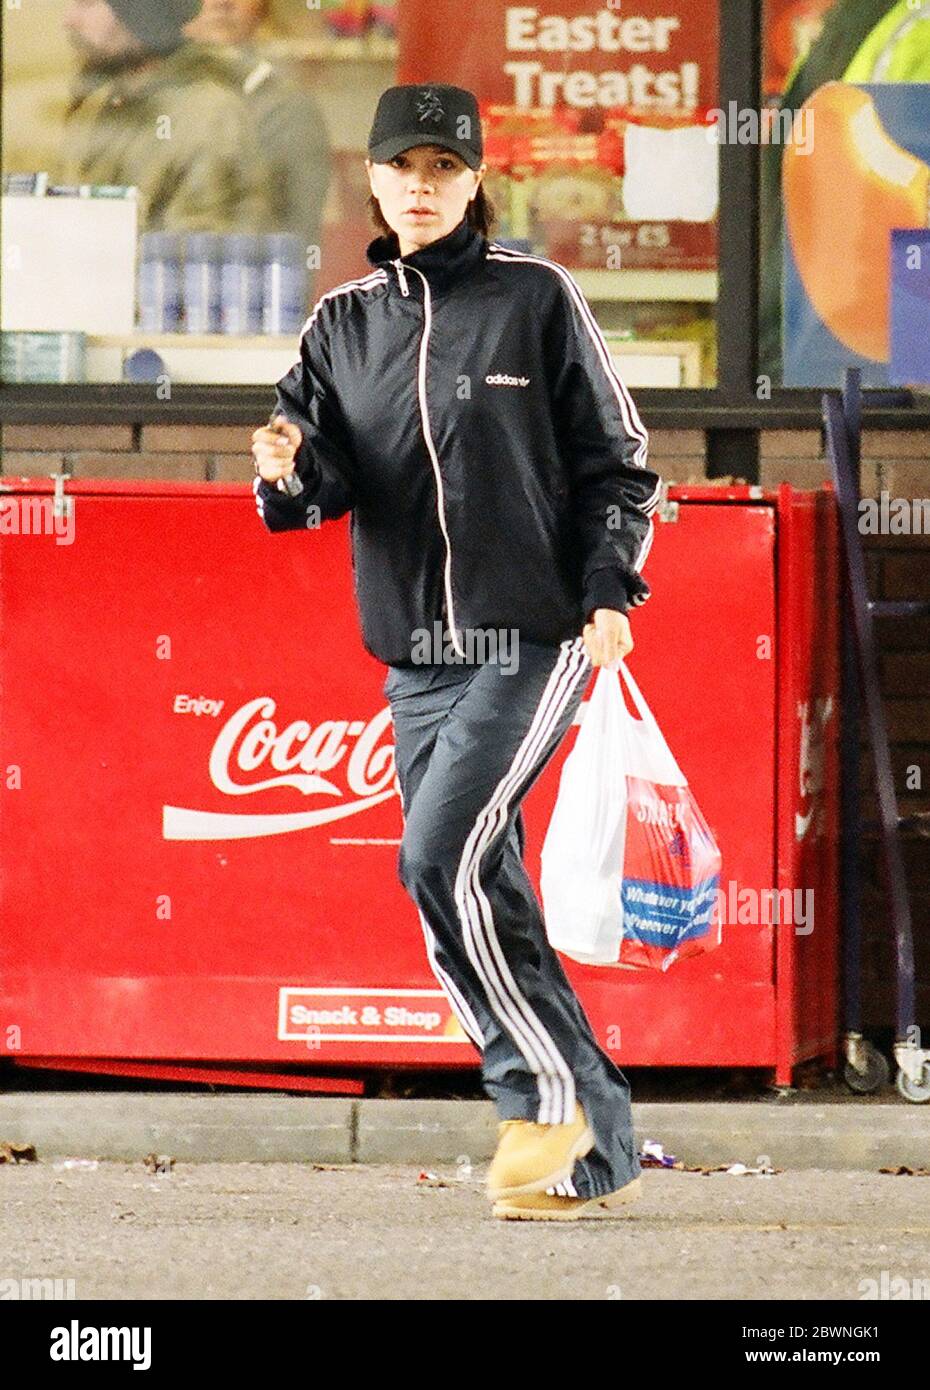 Celebrities Wearing Adidas Tracksuit Poland, SAVE 35% - aveclumiere.com